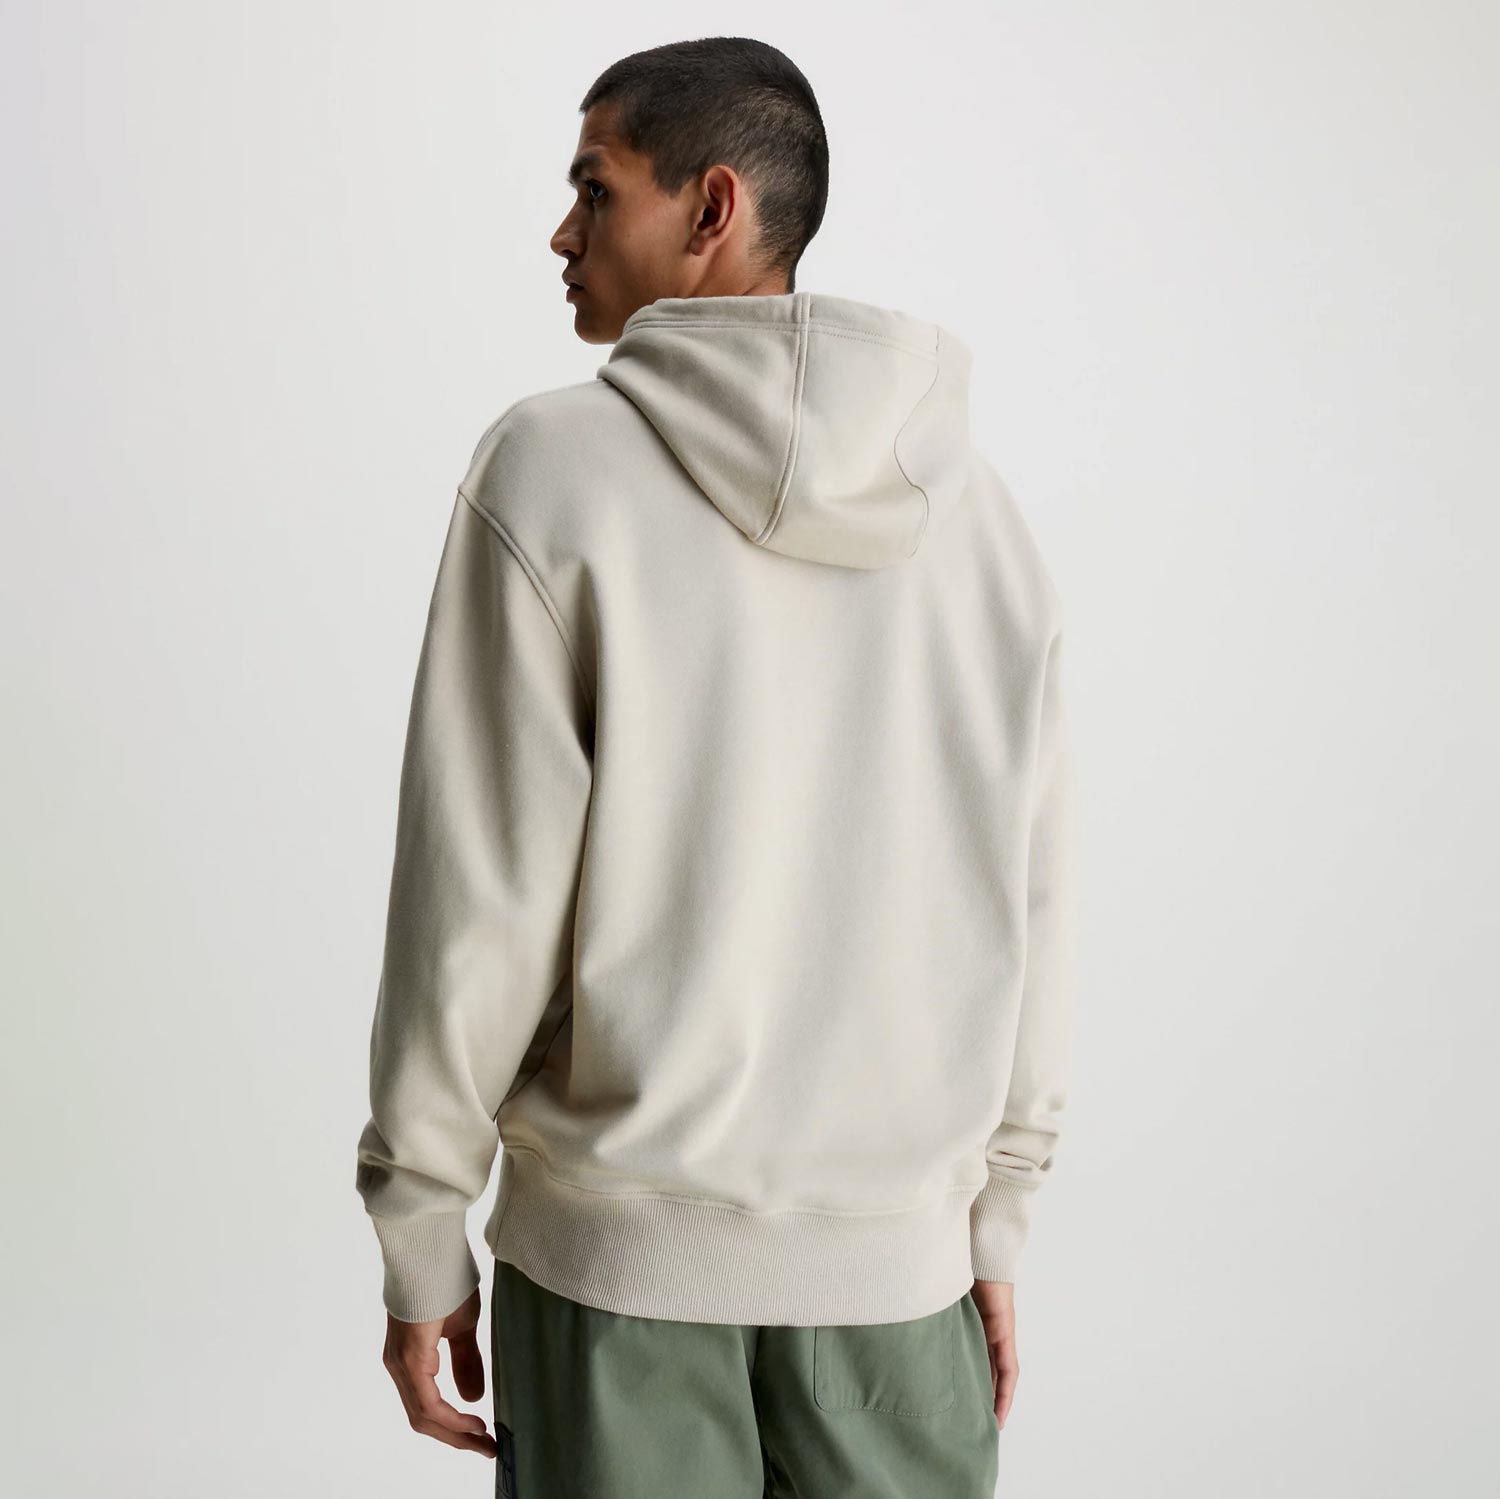 Calvin Klein Connected Layer Landscape Long Sleeve Regular Fit Hooded Sweat - Plaza Taupe